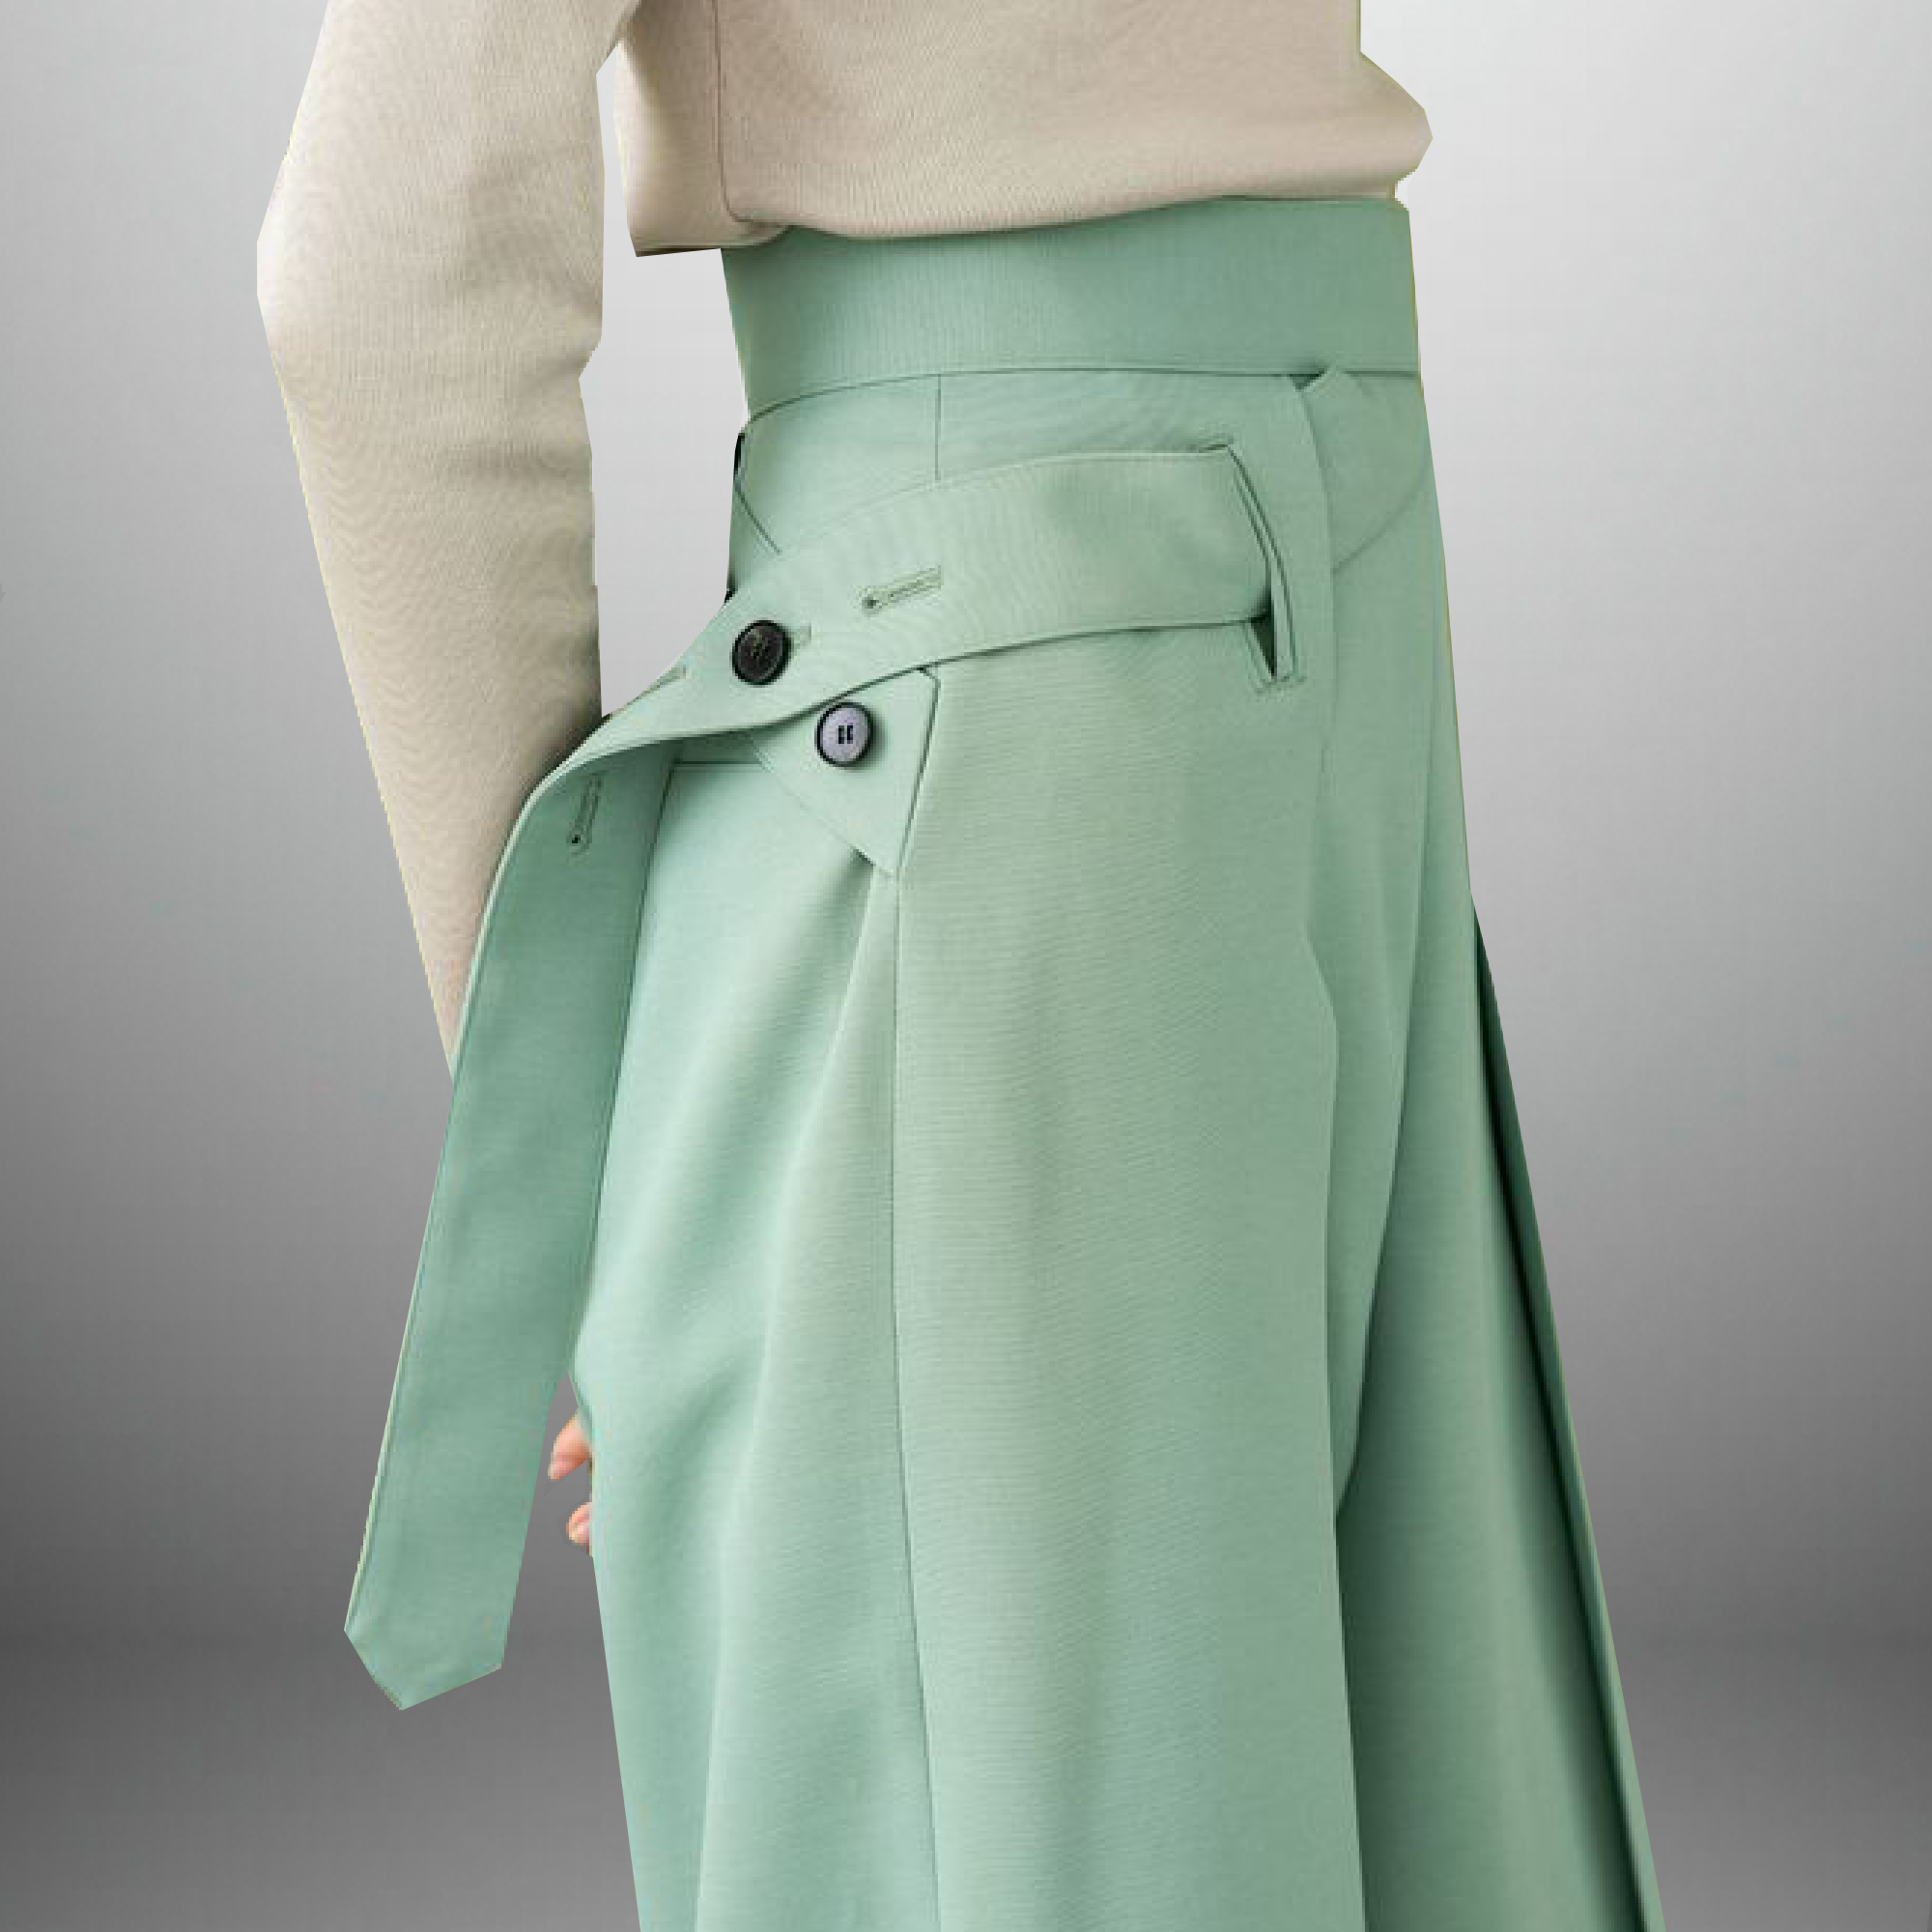 Women's pista green trousers with detailing-RCP031